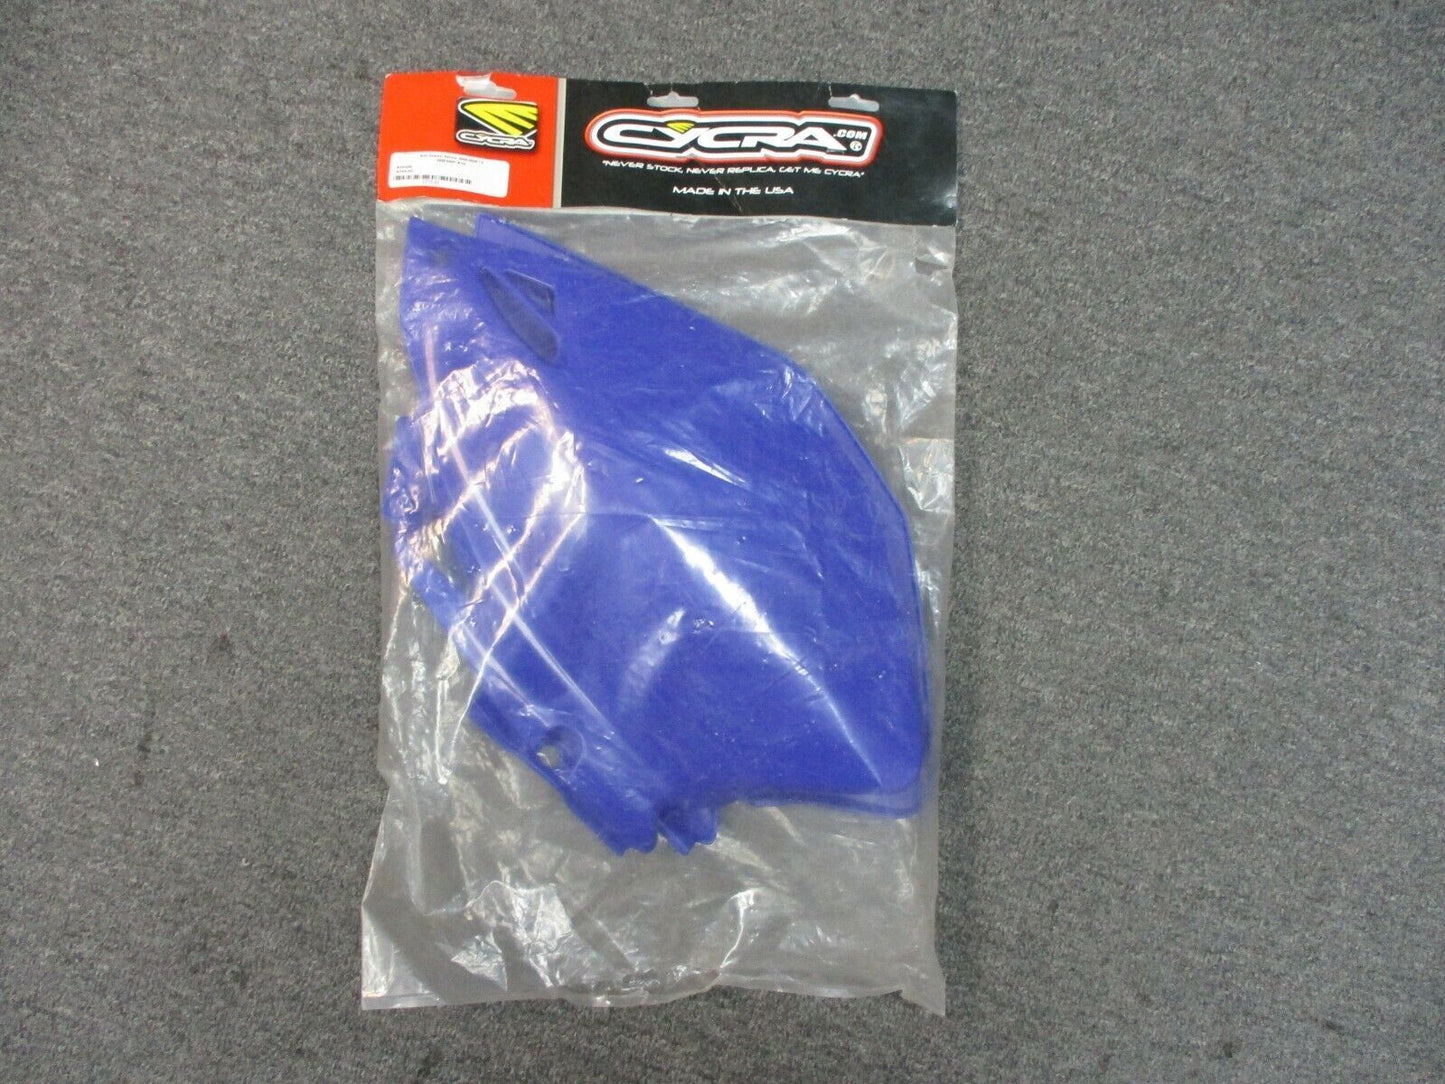 Yamaha YZ 250/450 Side Number Panels Blue By Cycra 2775-62 2006-09